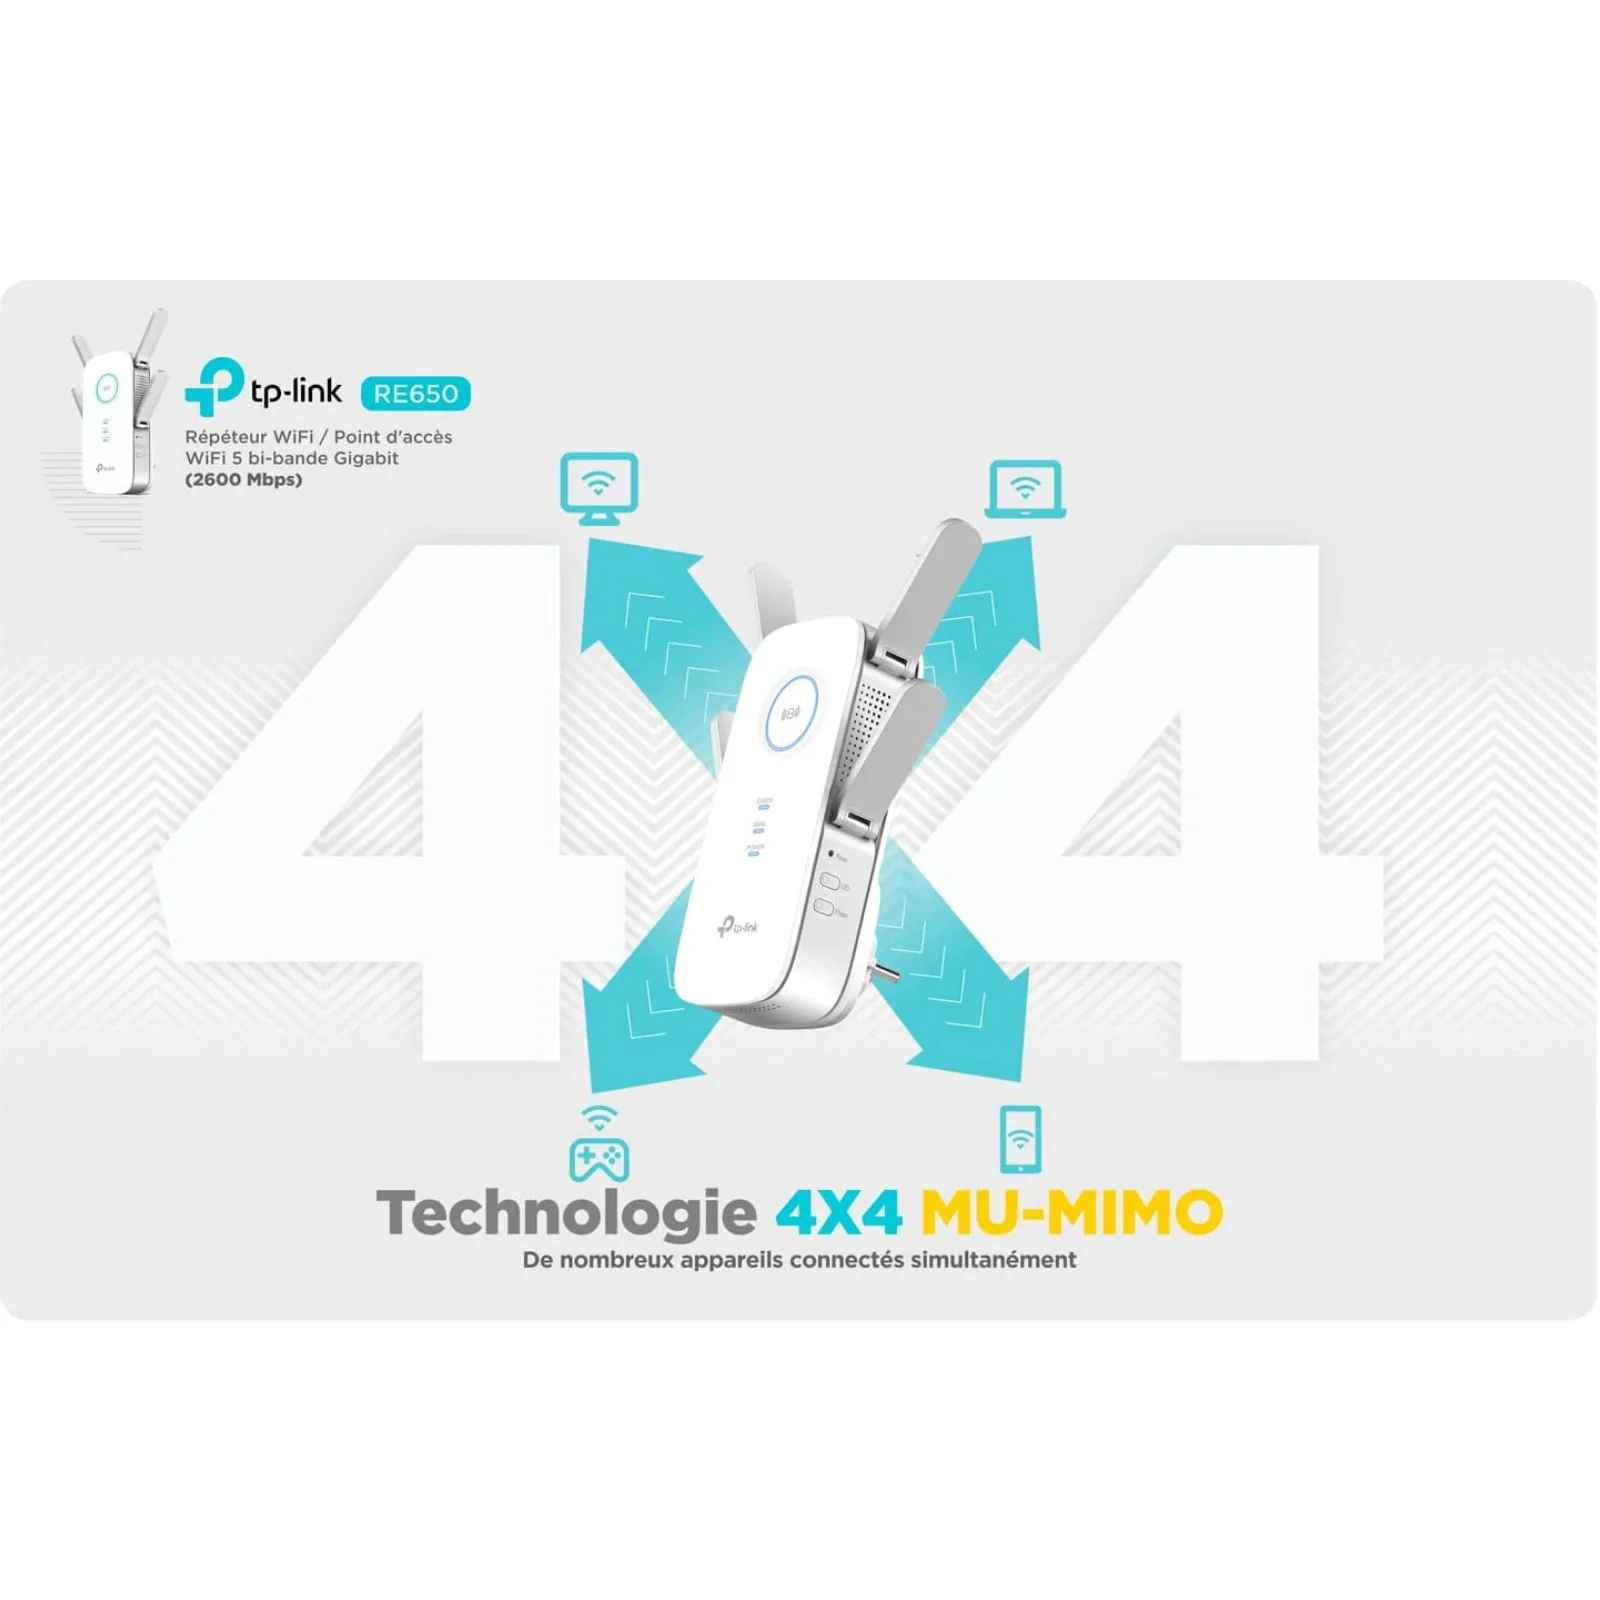 TP-Link AC2600 WiFi Extender(RE650), Up to 2600Mbps, Dual Band WiFi Range  Extender, Gigabit port, Internet Booster, Repeater, Access Point,4x4 MU-MIMO